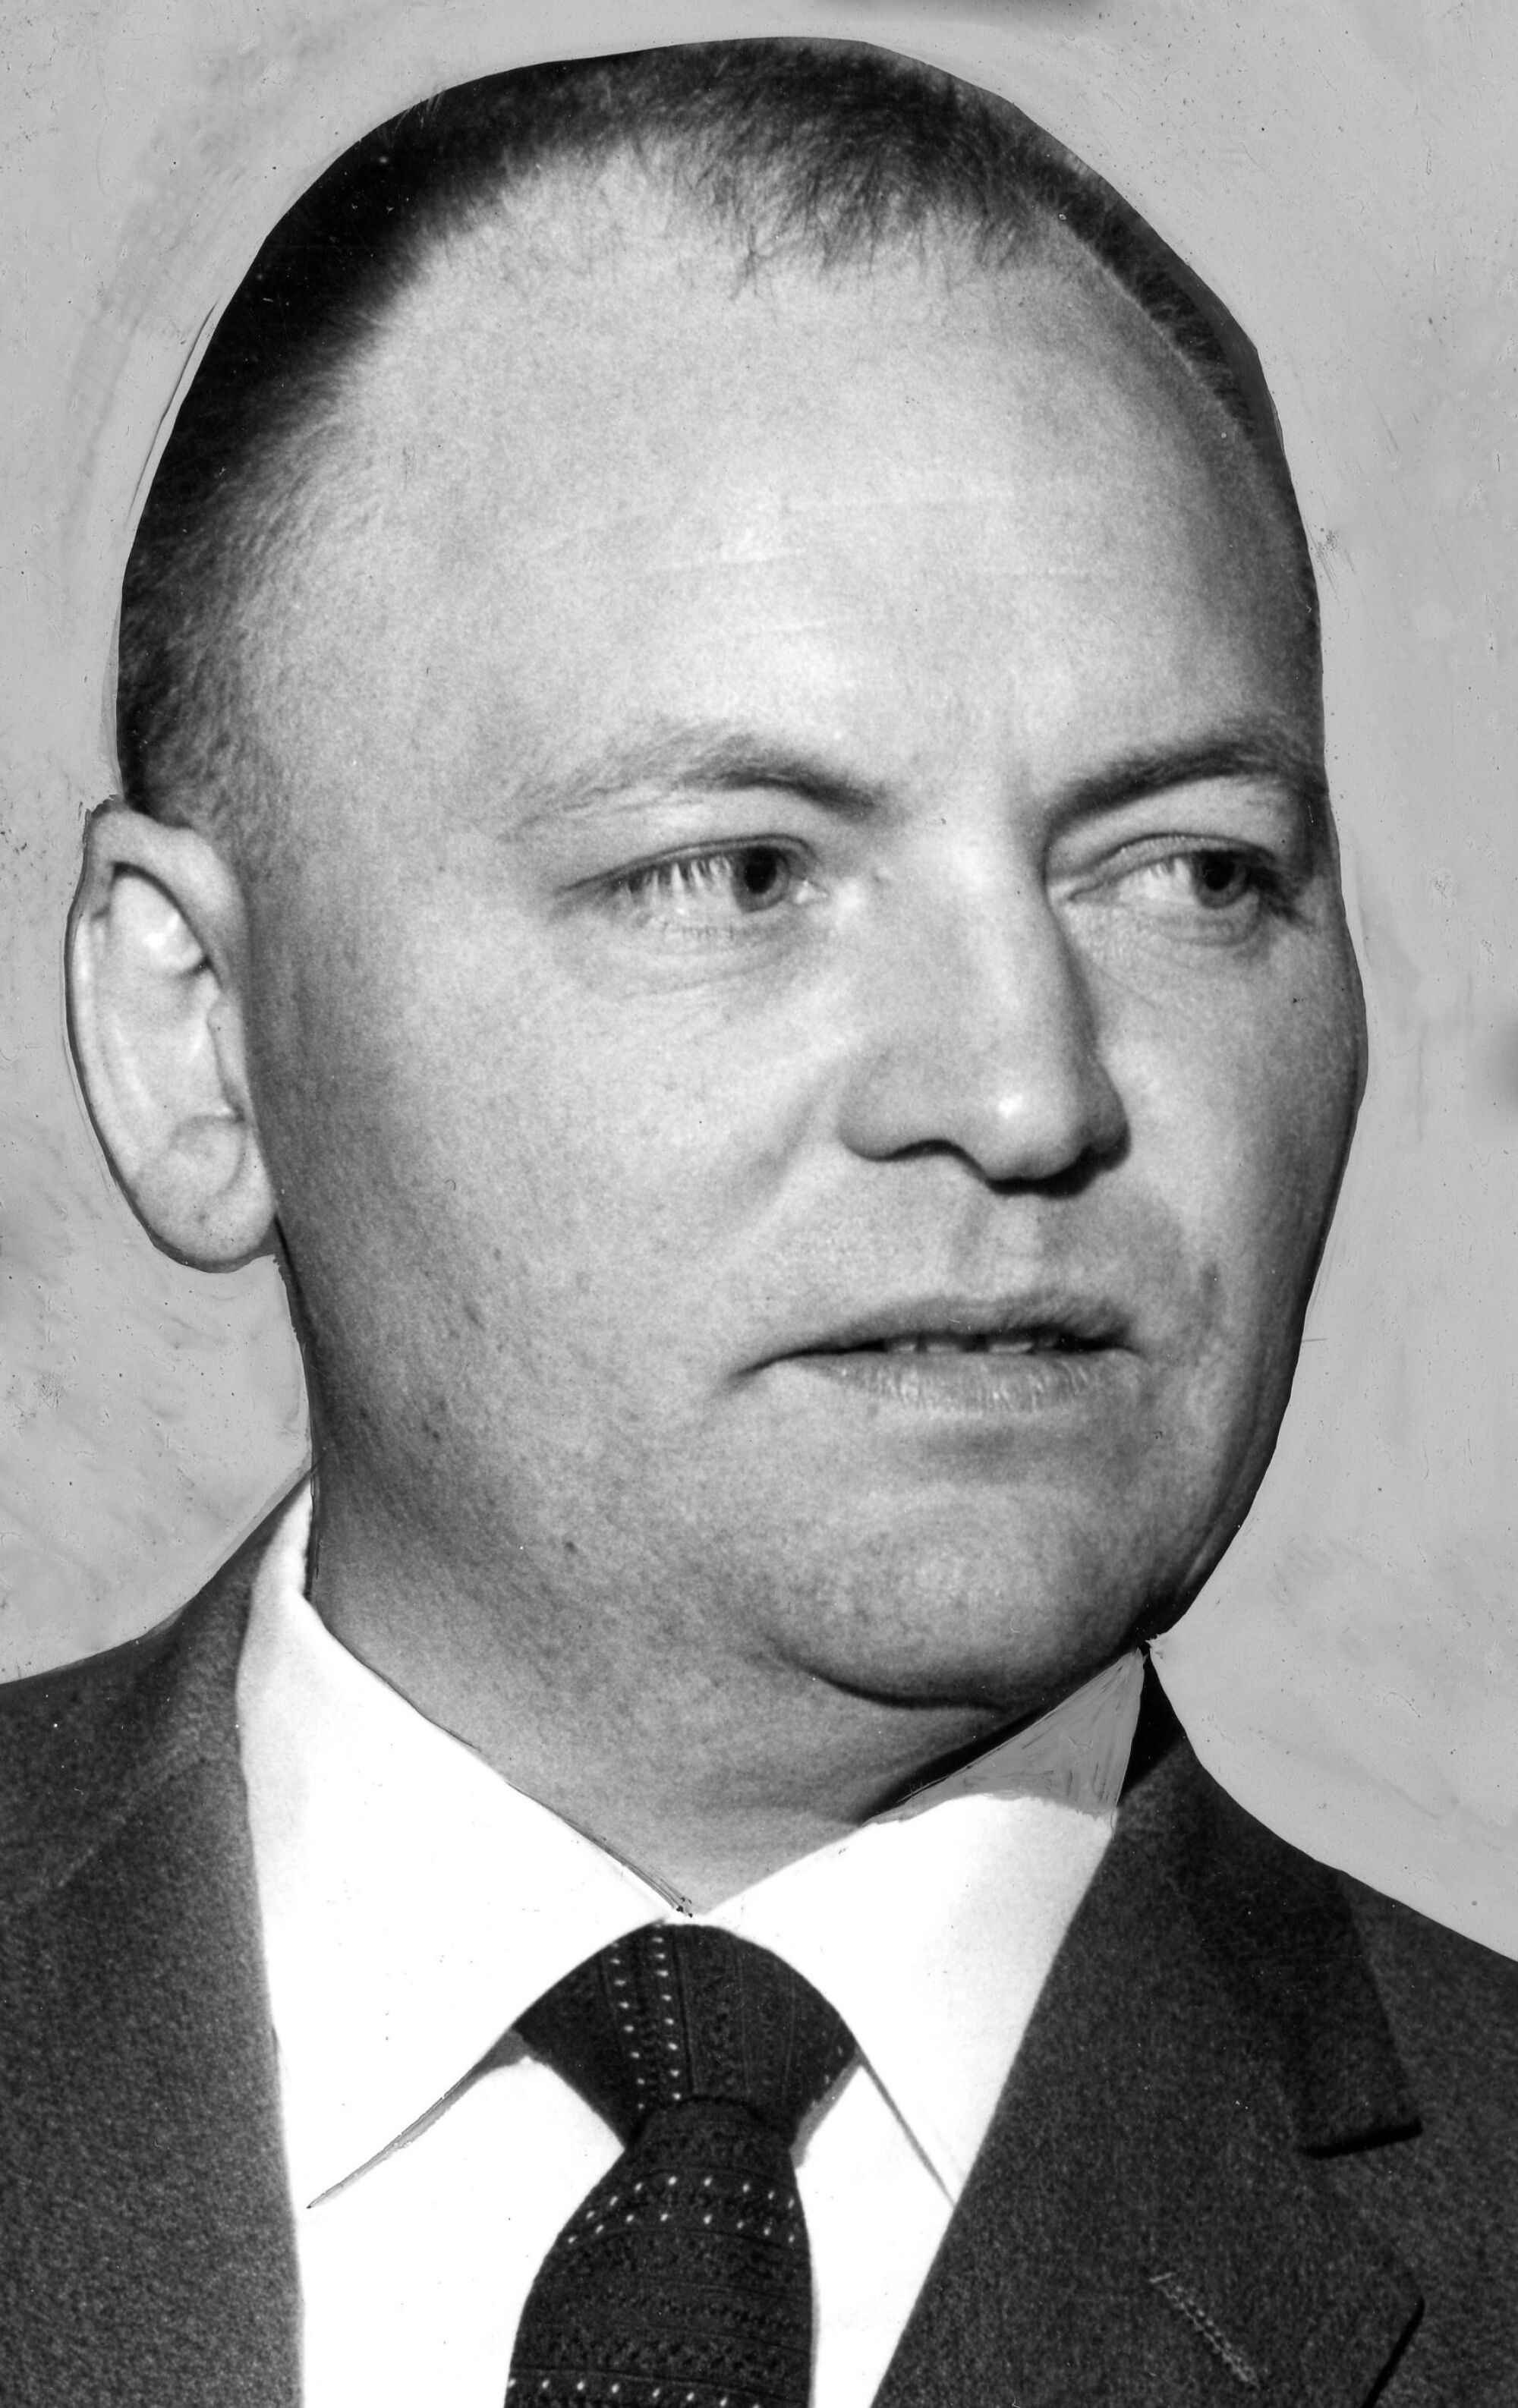 Headshot of Walter Wencke in 1960 with retouched background.